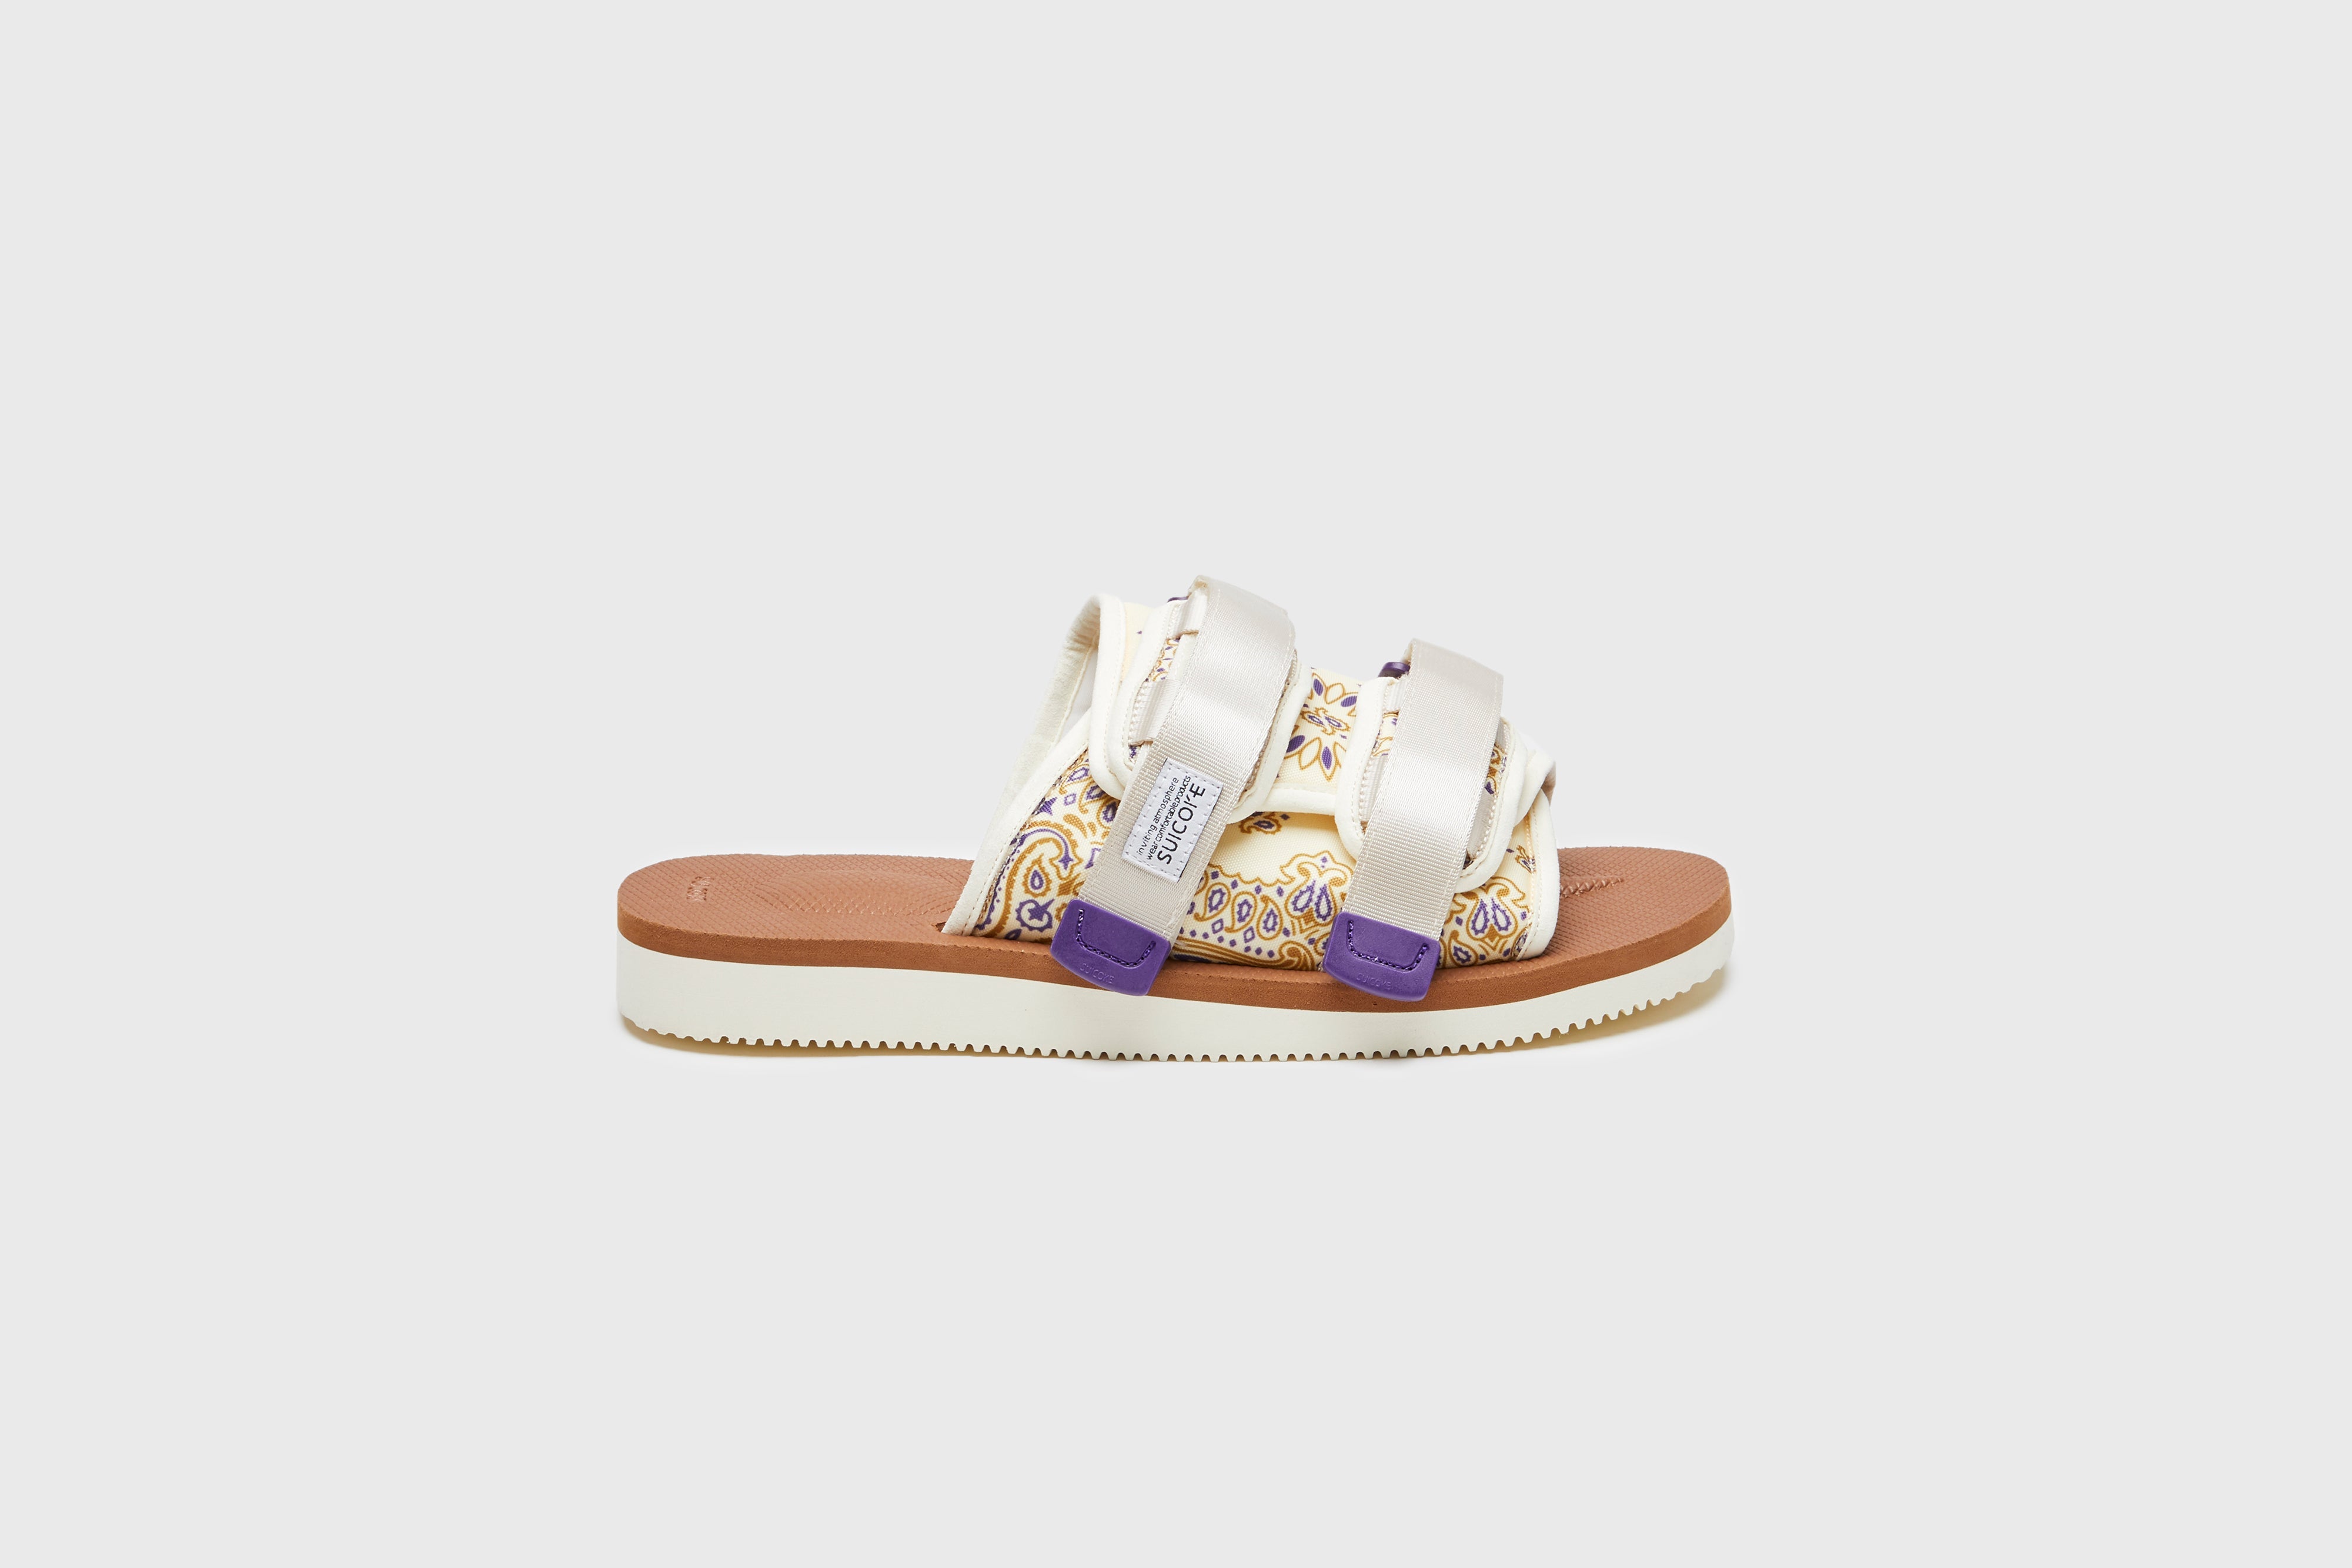 SUICOKE MOTO-Cab-PT05 sandals with ivory &amp; brown nylon upper, ivory &amp; brown midsole and sole, strap and logo patch. From Spring/Summer 2023 collection on eightywingold Web Store, an official partner of SUICOKE. OG-056CAB-PT05 IVORY X BROWN